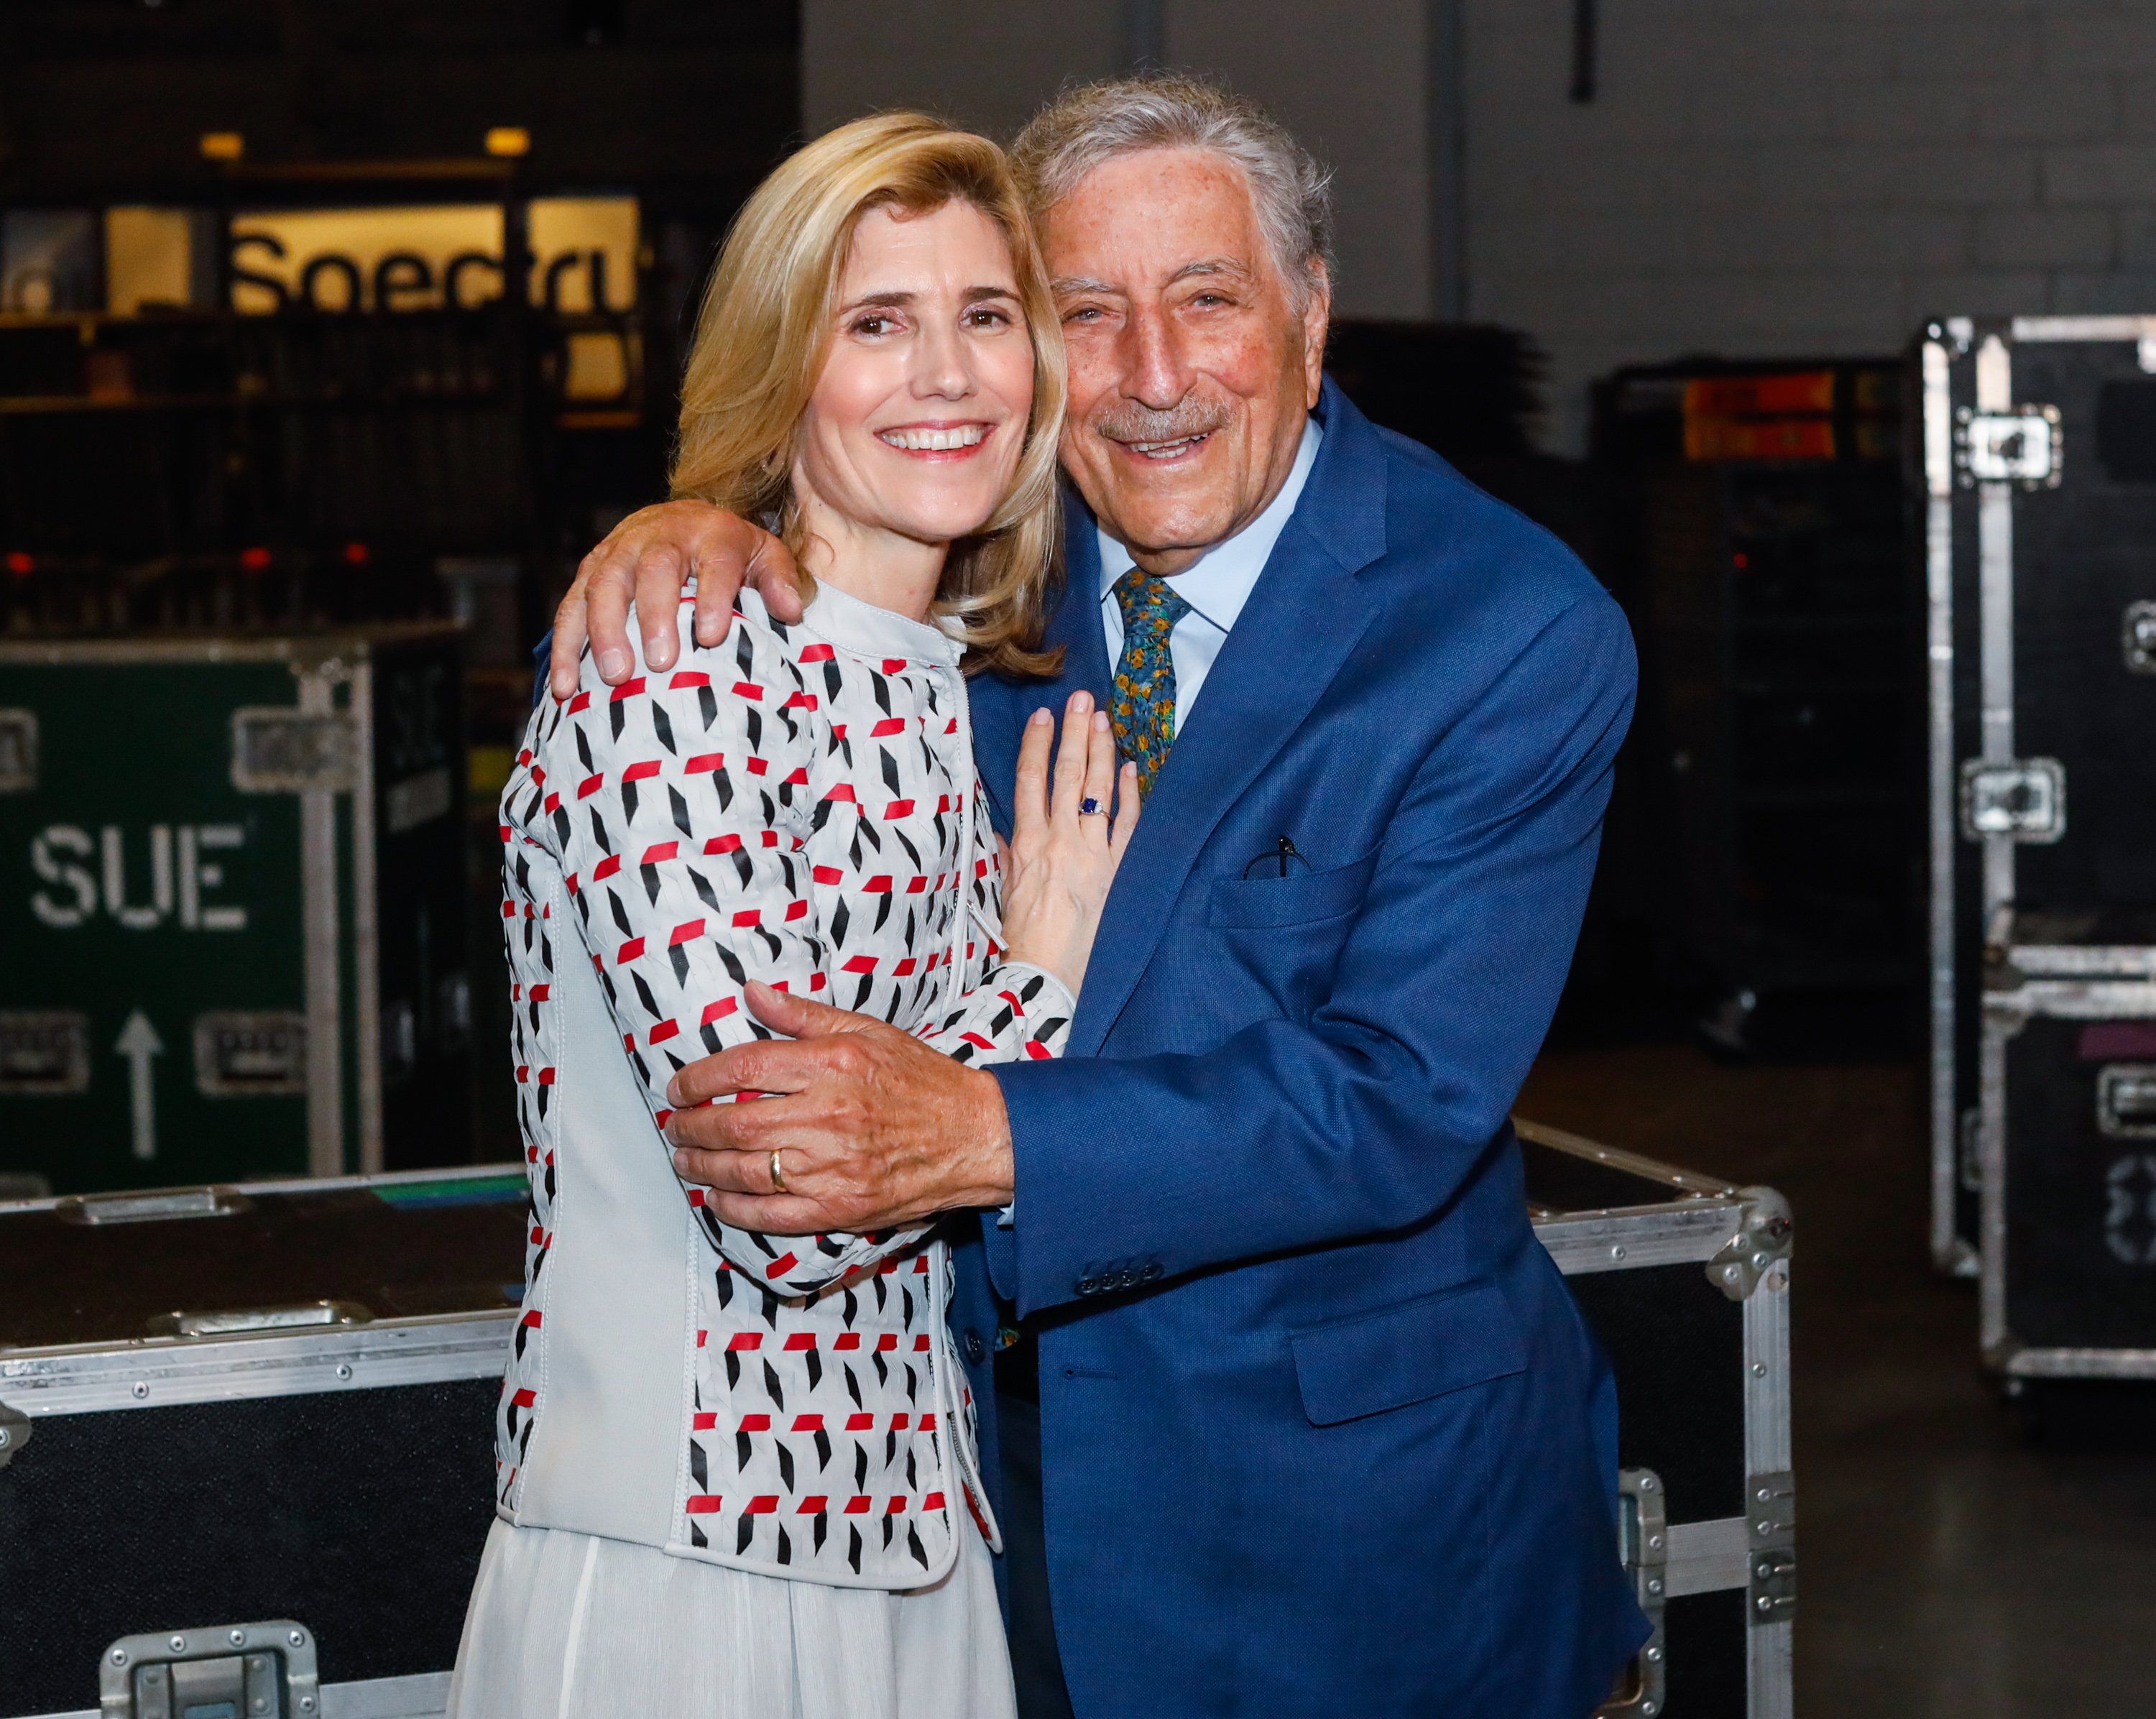 Tony Bennett and Susan Crow backstage at the 63rd sold-out show of Billy Joel's residency at Madison Square Garden on April 12, 2019, in New York City. | Source: Getty Images